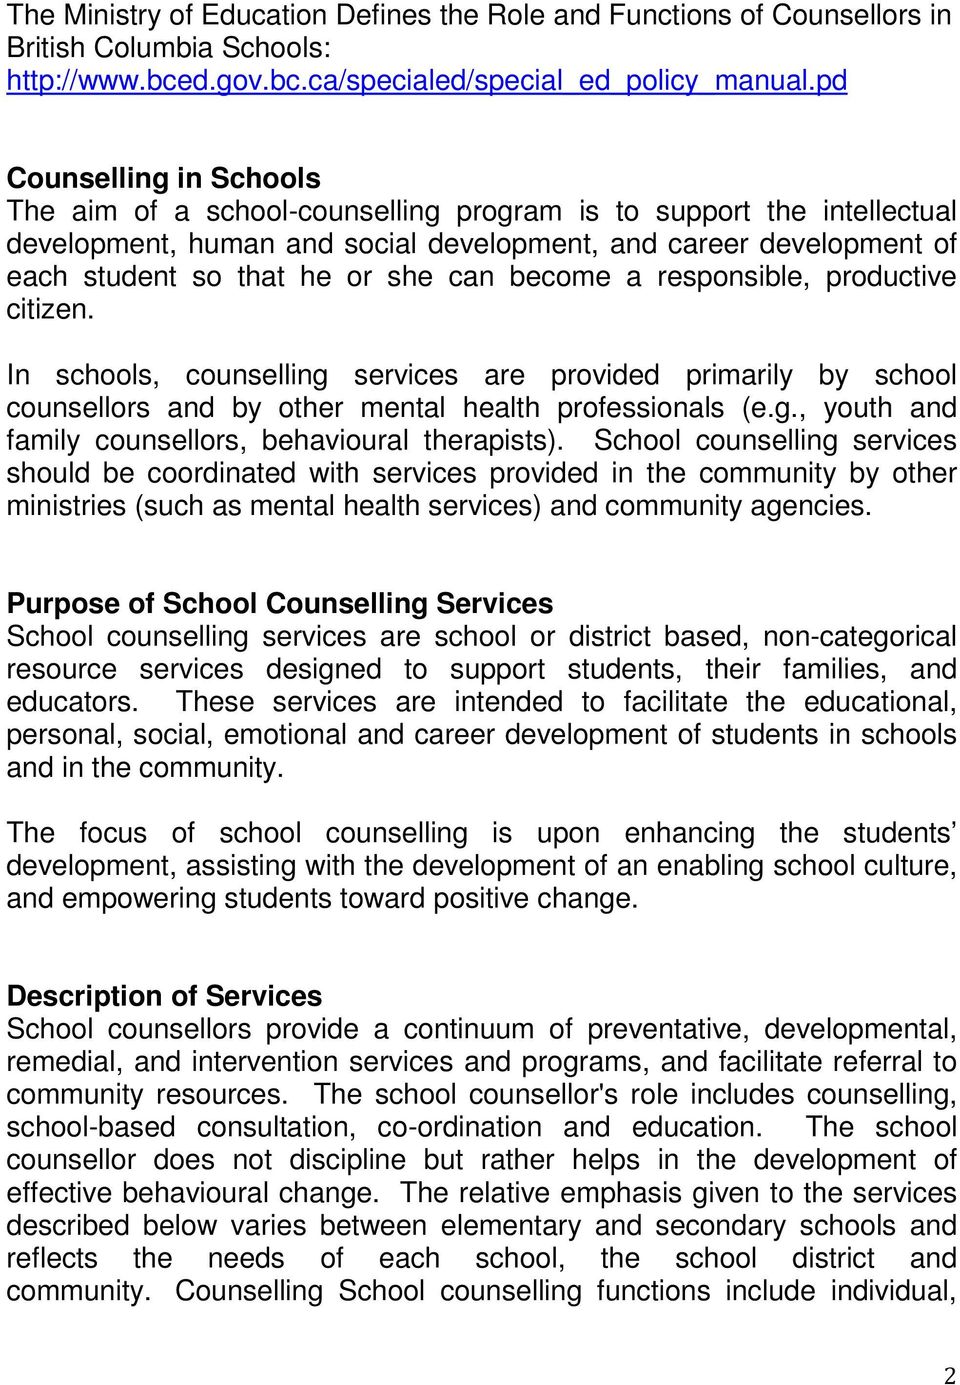 can become a responsible, productive citizen. In schools, counselling services are provided primarily by school counsellors and by other mental health professionals (e.g., youth and family counsellors, behavioural therapists).